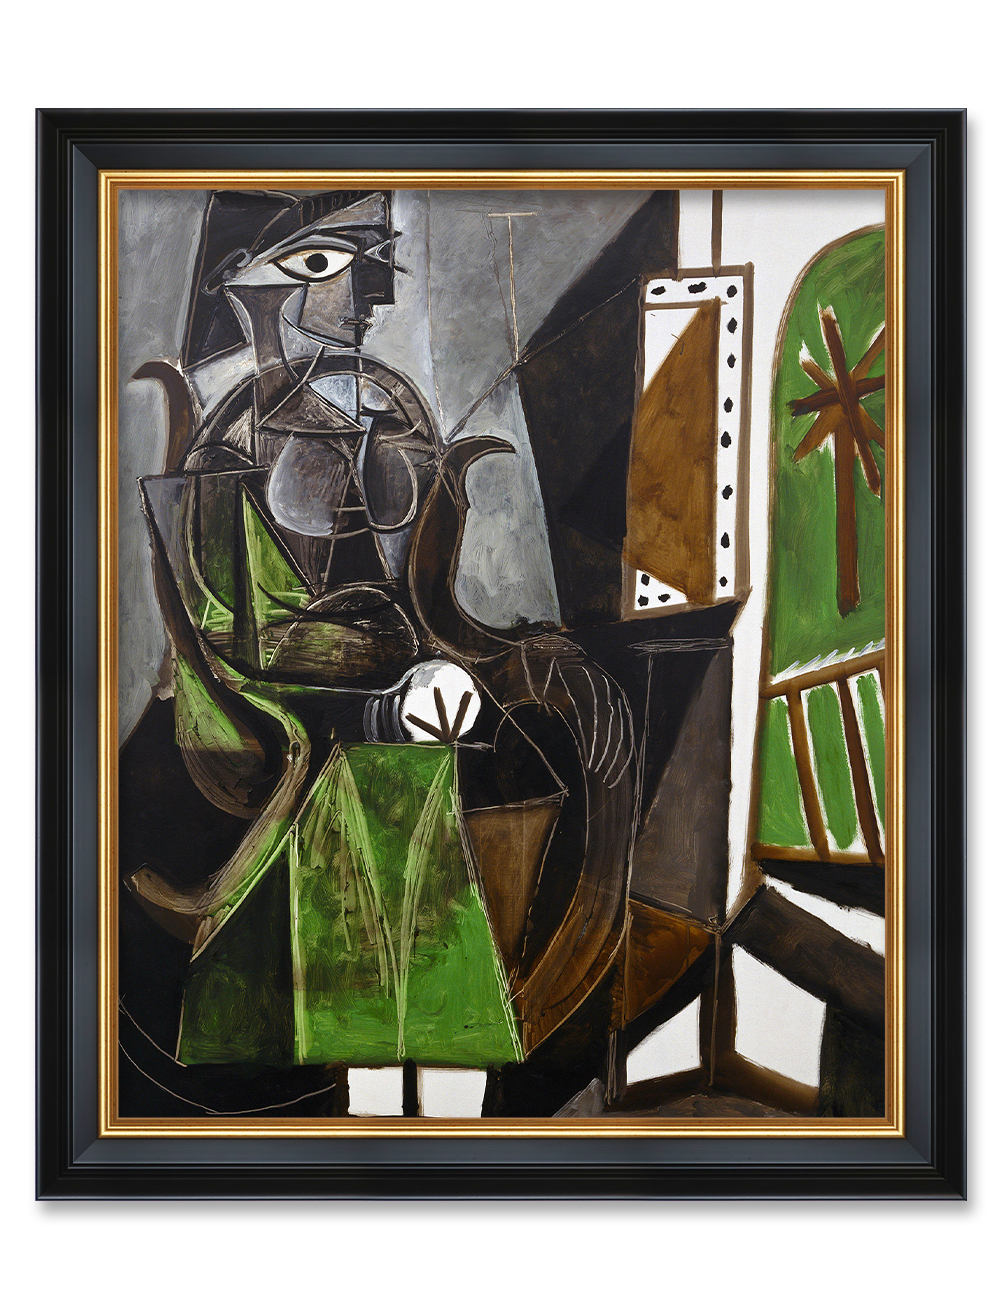 DECORARTS Woman by a Window by Pablo Picasso, Giclee Print on Acid Free  Canvas with Matching Solid Wood Frame, Framed Artwork for Wall Decor. Total  Framed Size: W 23.25